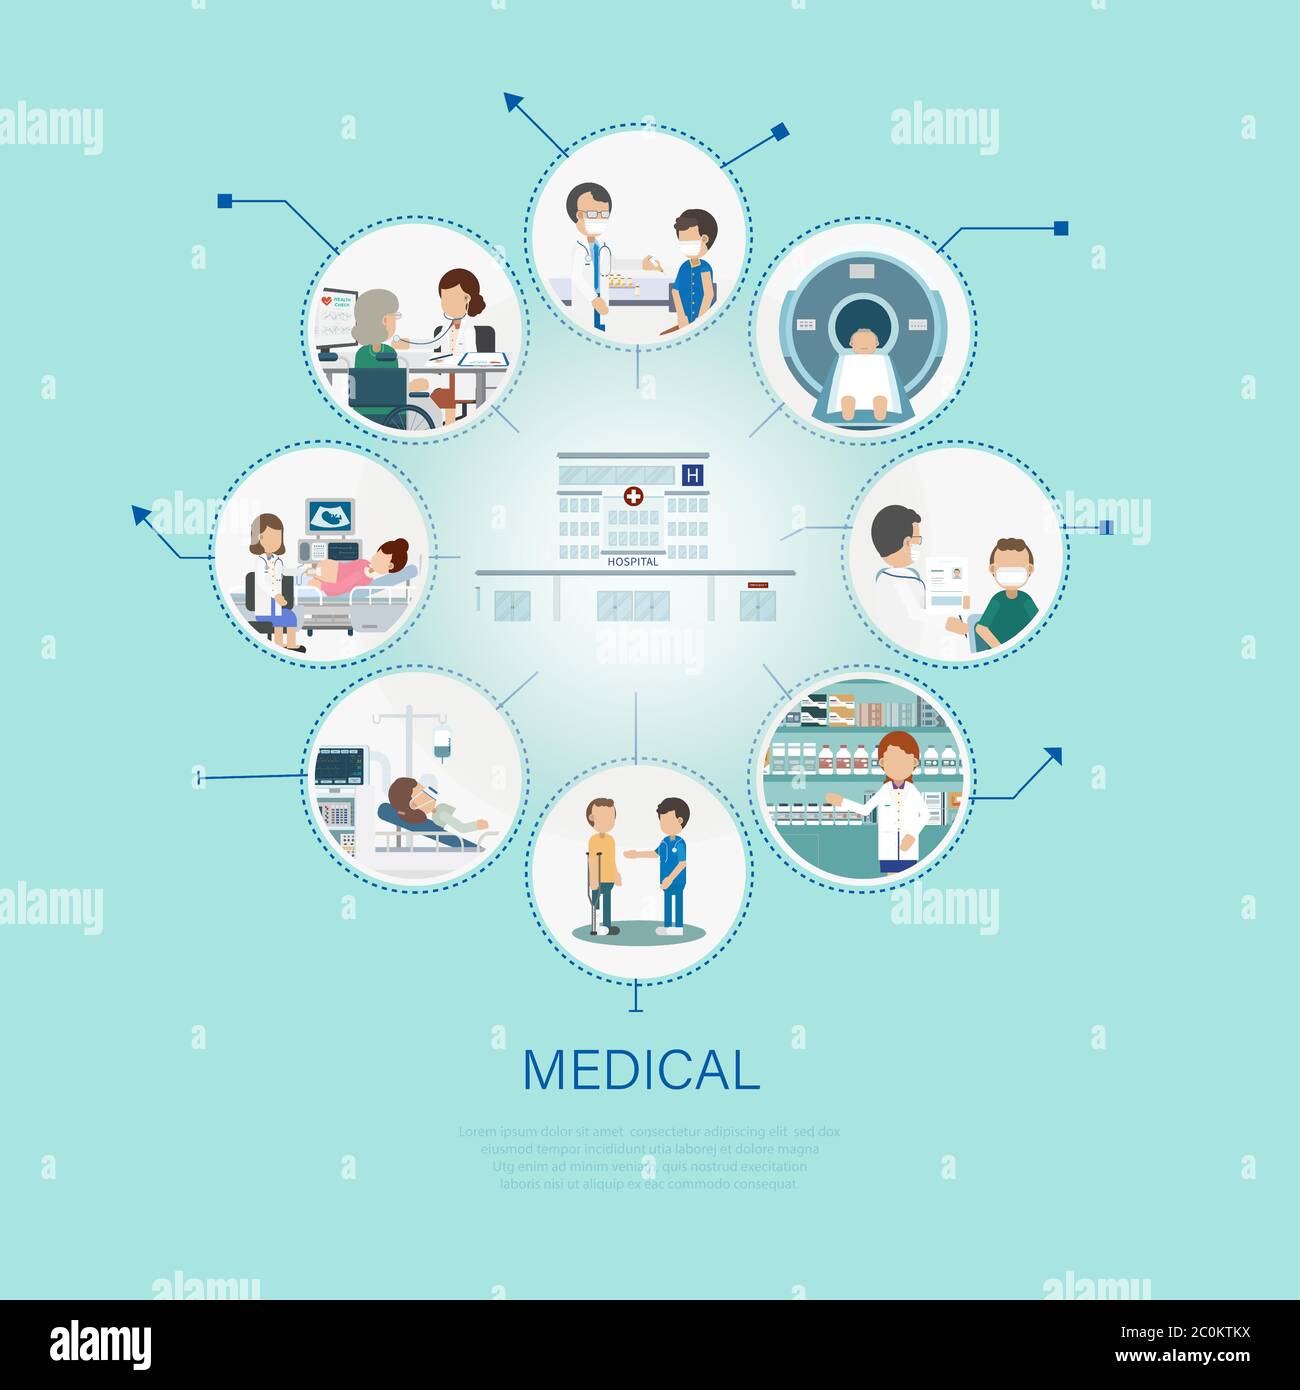 Medical concept with doctors and patients flat design vector illustration Stock Vector